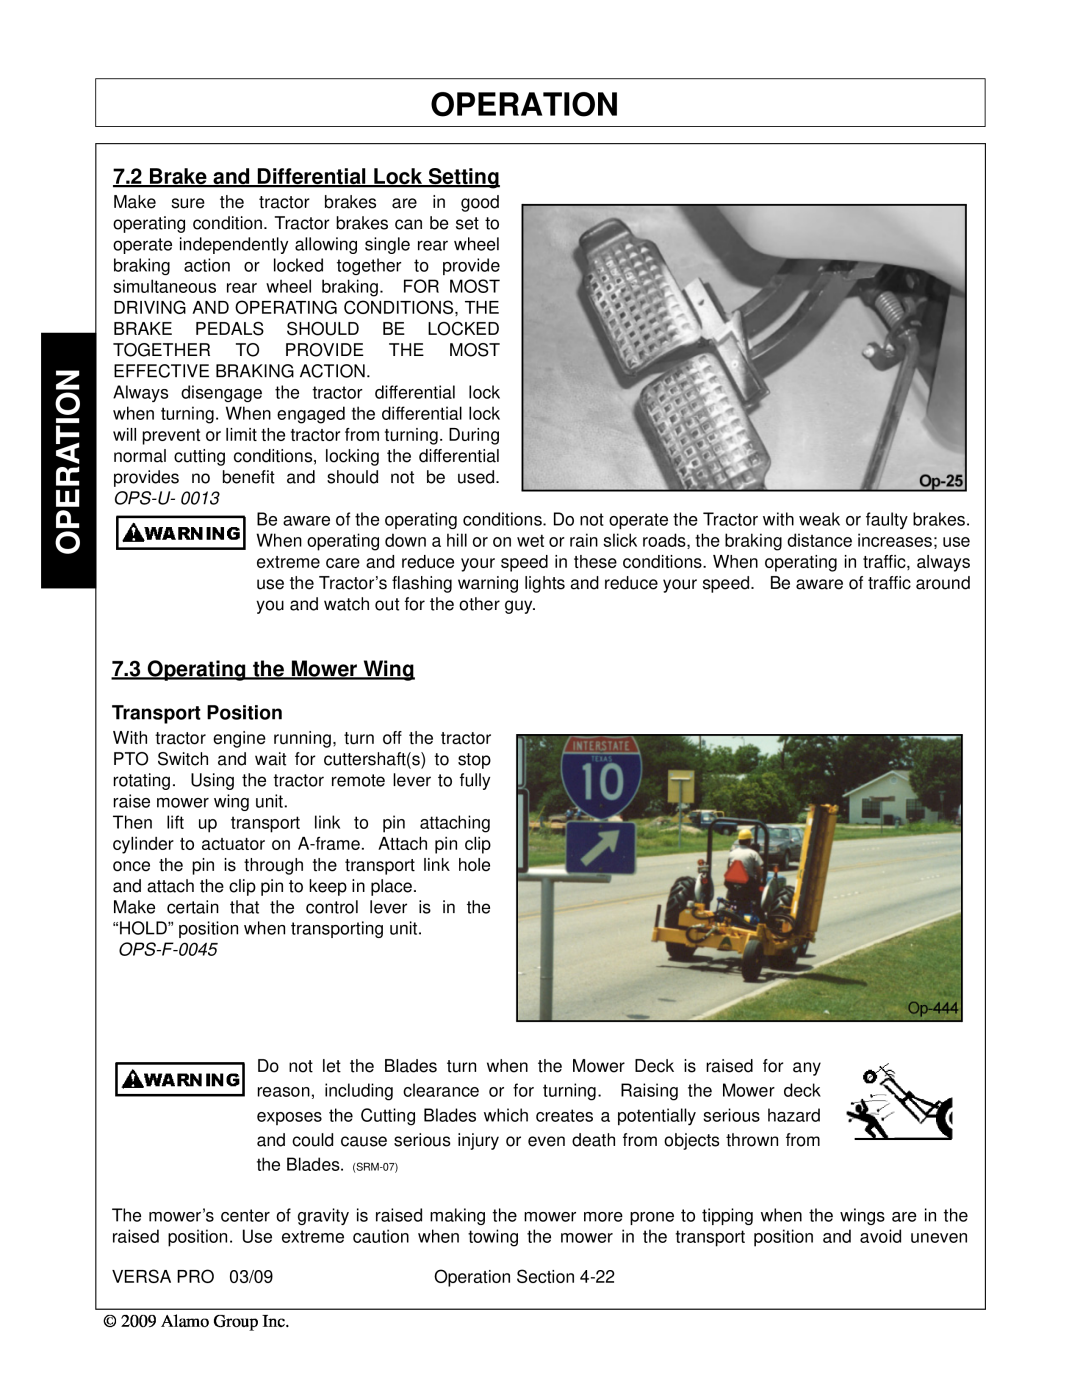 Alamo 803350C manual Brake and Differential Lock Setting, Operating the Mower Wing, Operation, Transport Position 